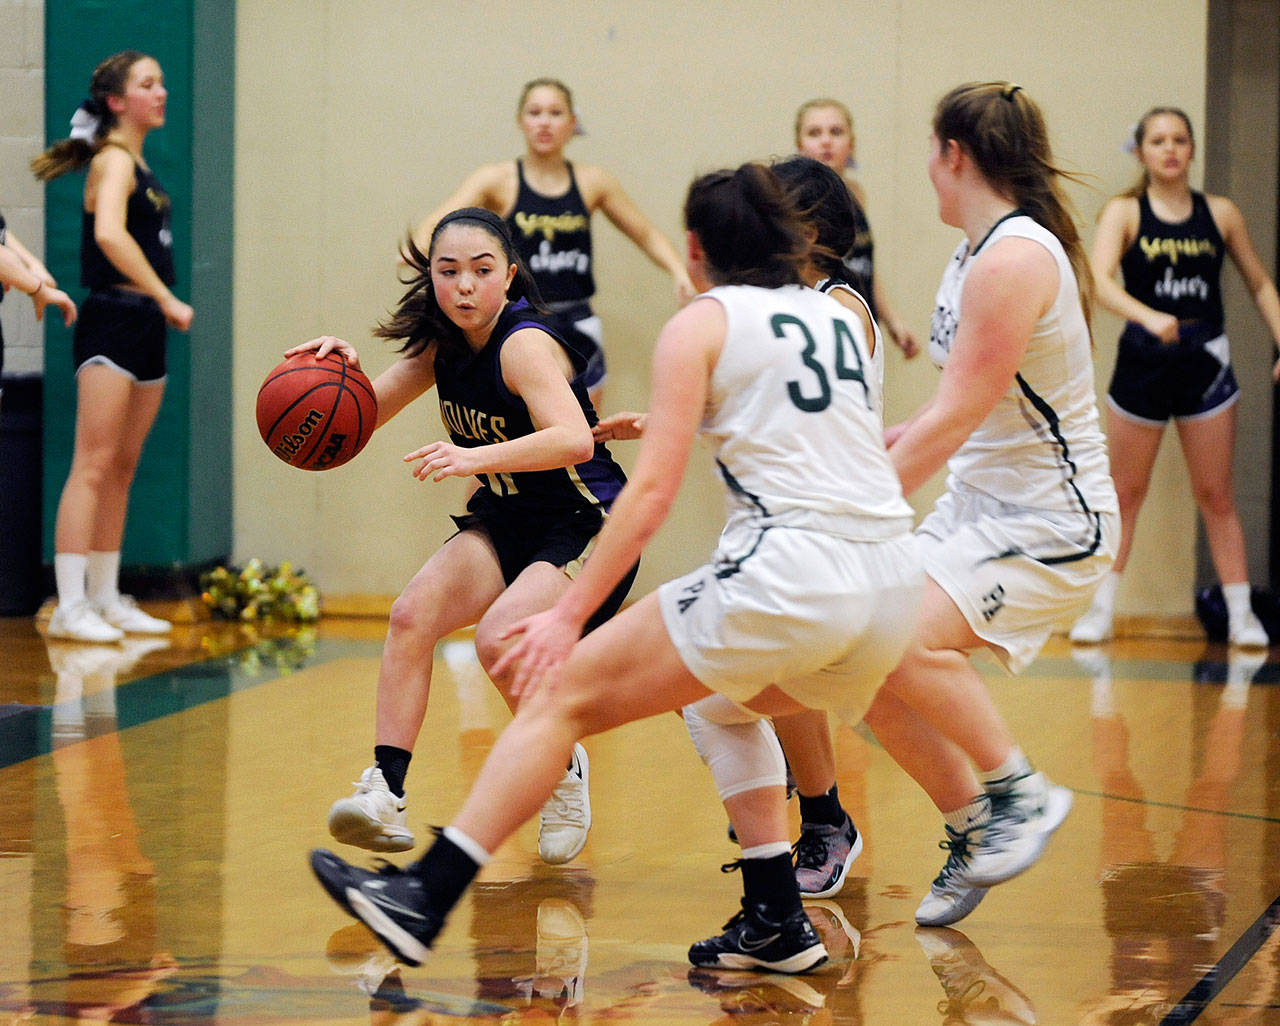 Girls basketball: Wolves fall to PA, will face Foster in district opener